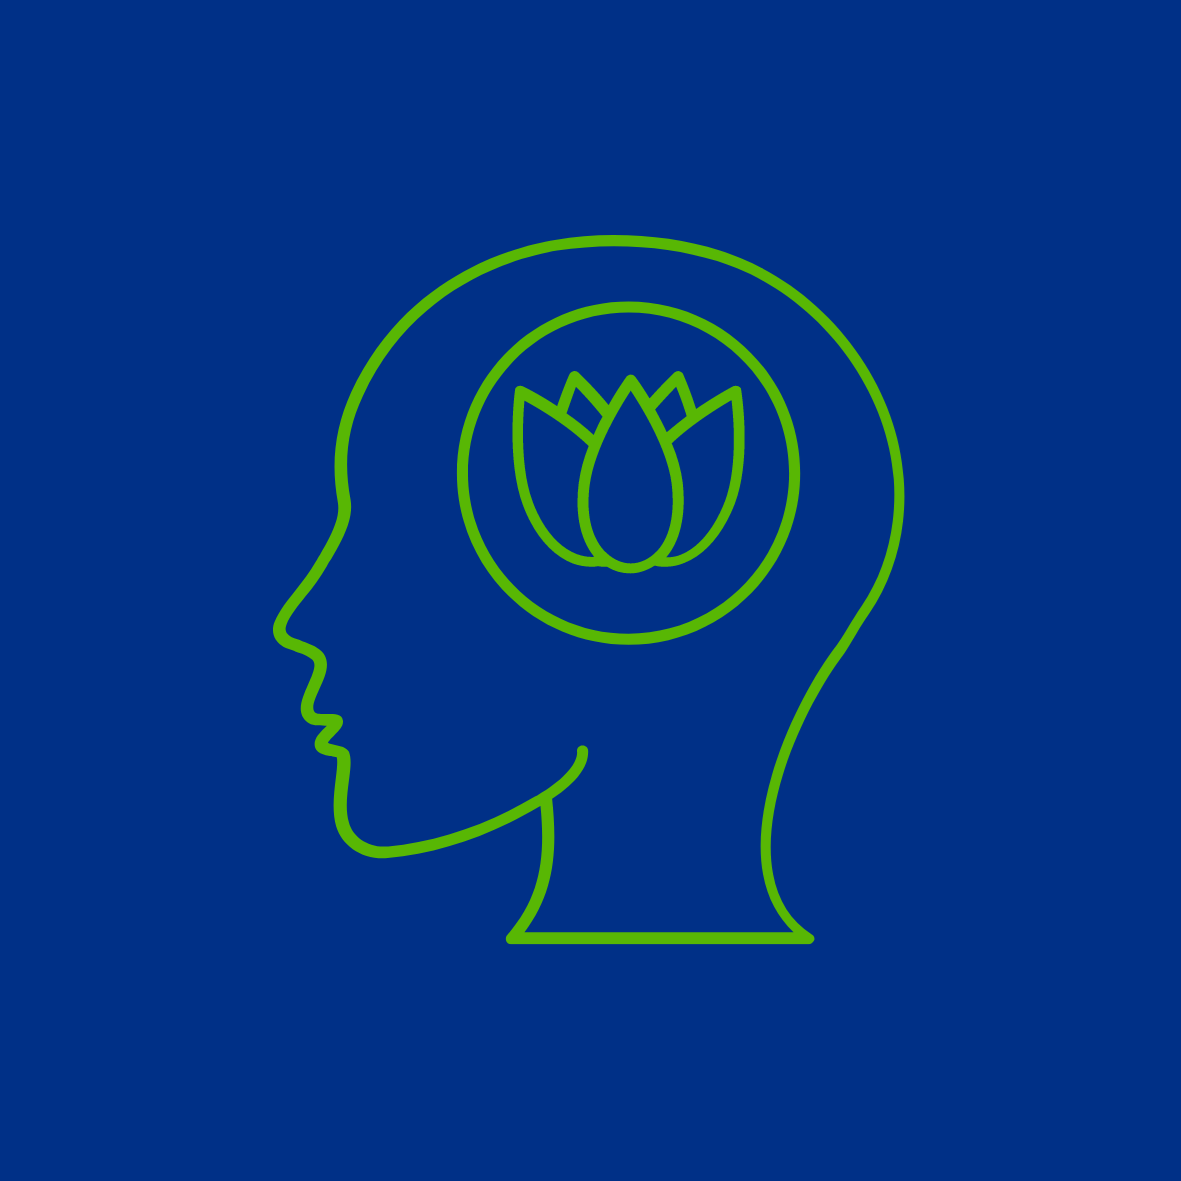 Head and Lotus Flower Icon to Depict Health and Well-Being